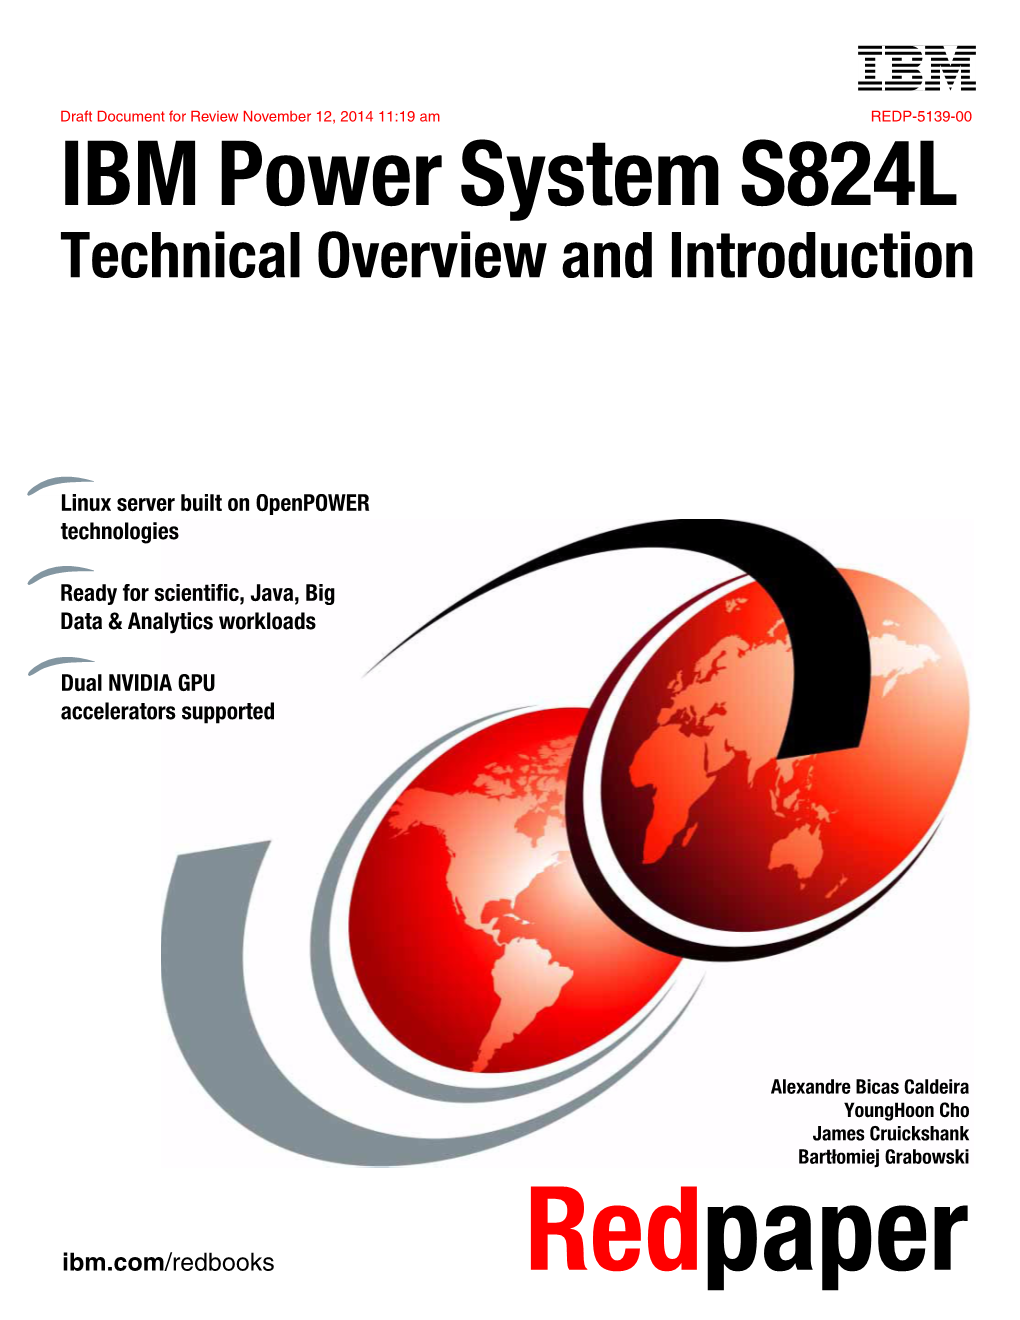 IBM Power System S824L Technical Overview and Introduction